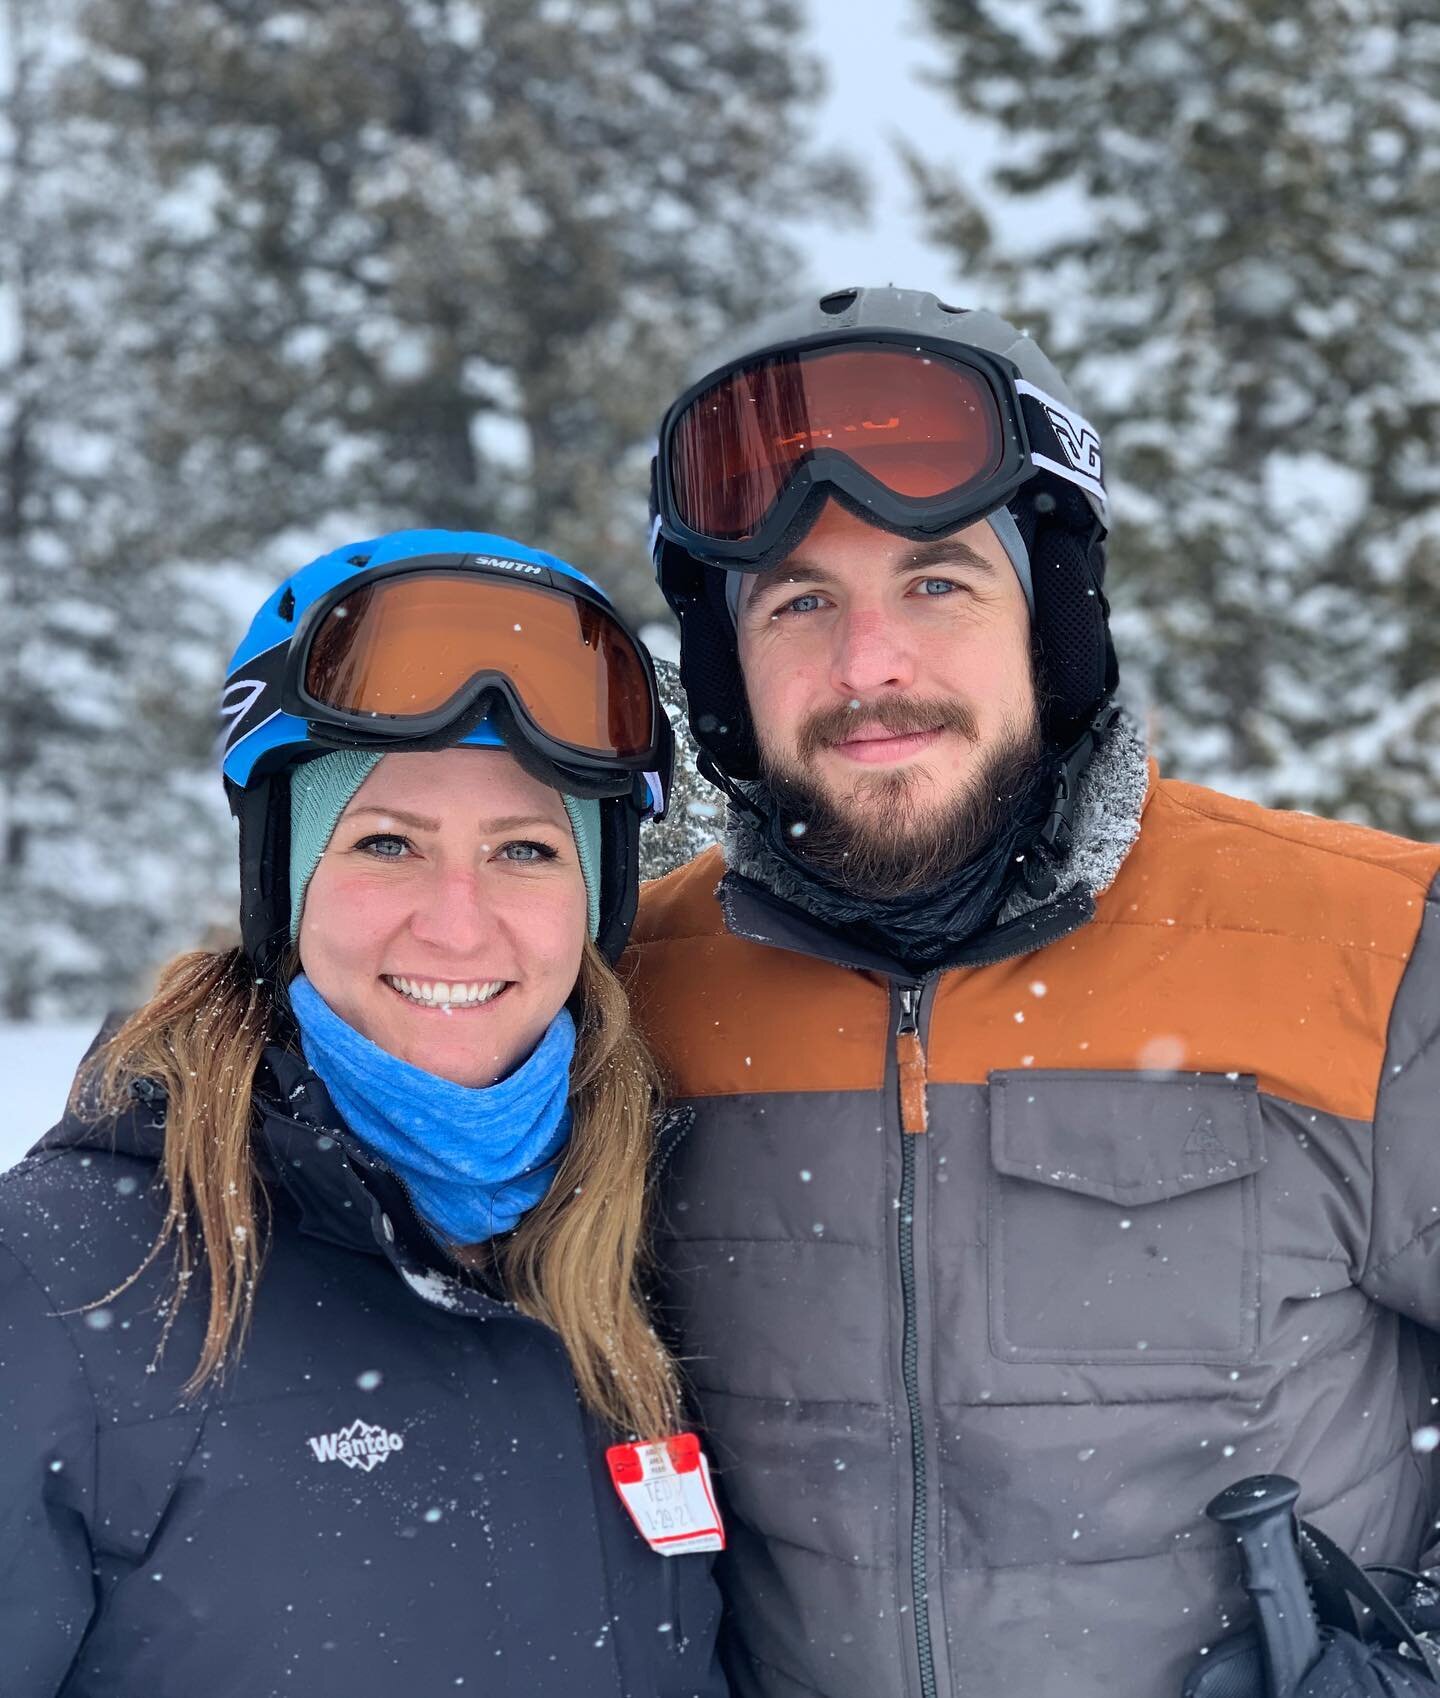 Happy birthday to my beautiful wife! Went skiing today to celebrate. Had a great time! Love you babe. #MullenTheMaker